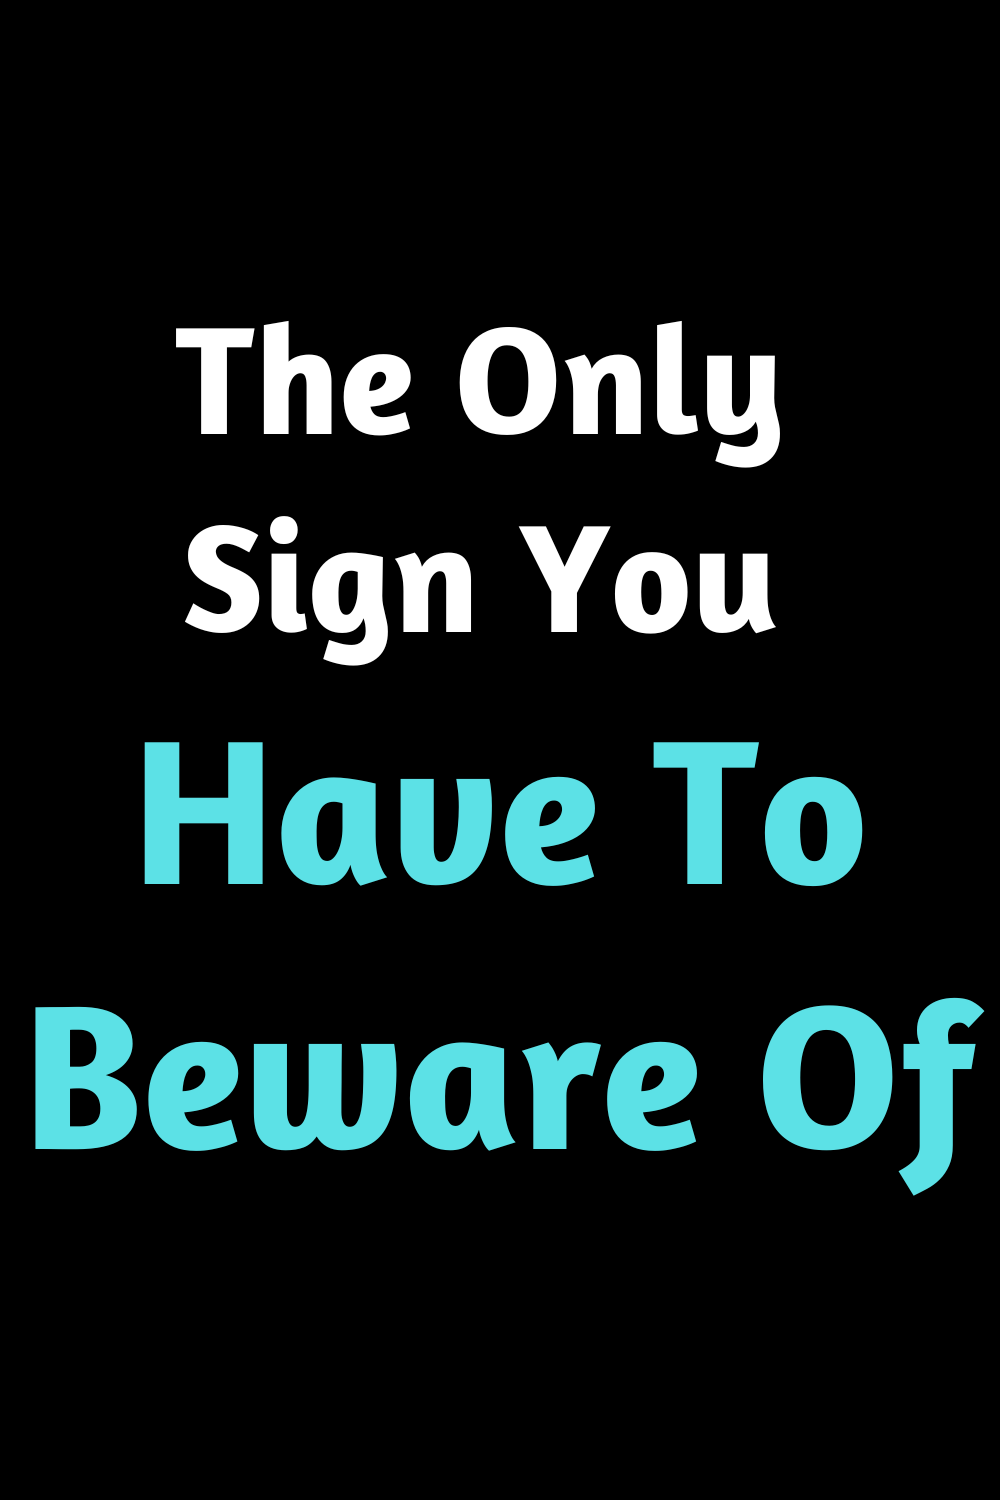 The Only Sign You Have To Beware Of